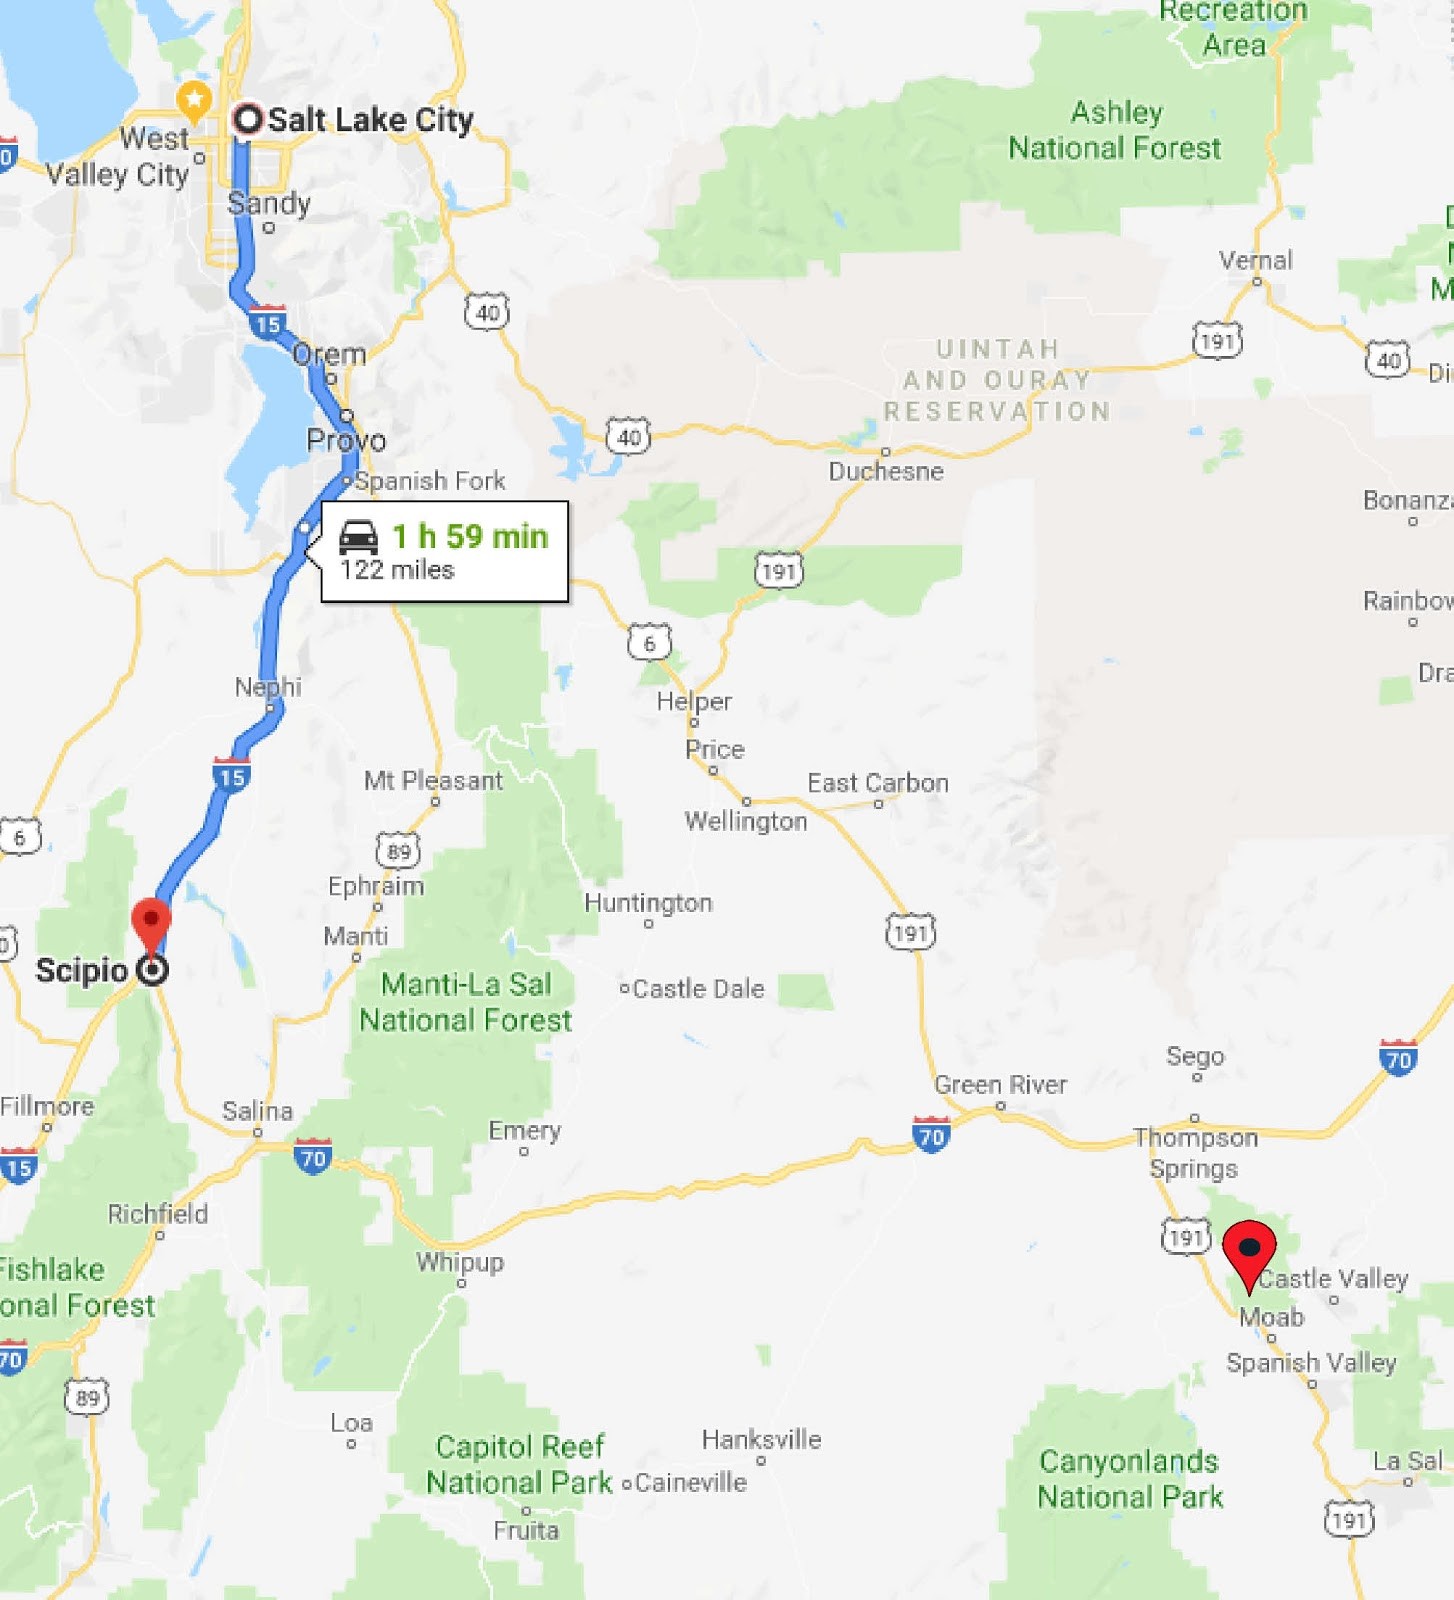 A map of northern Utah shows a highlighted route from Salt Lake City to Scipio with a note that the route is 122 miles long